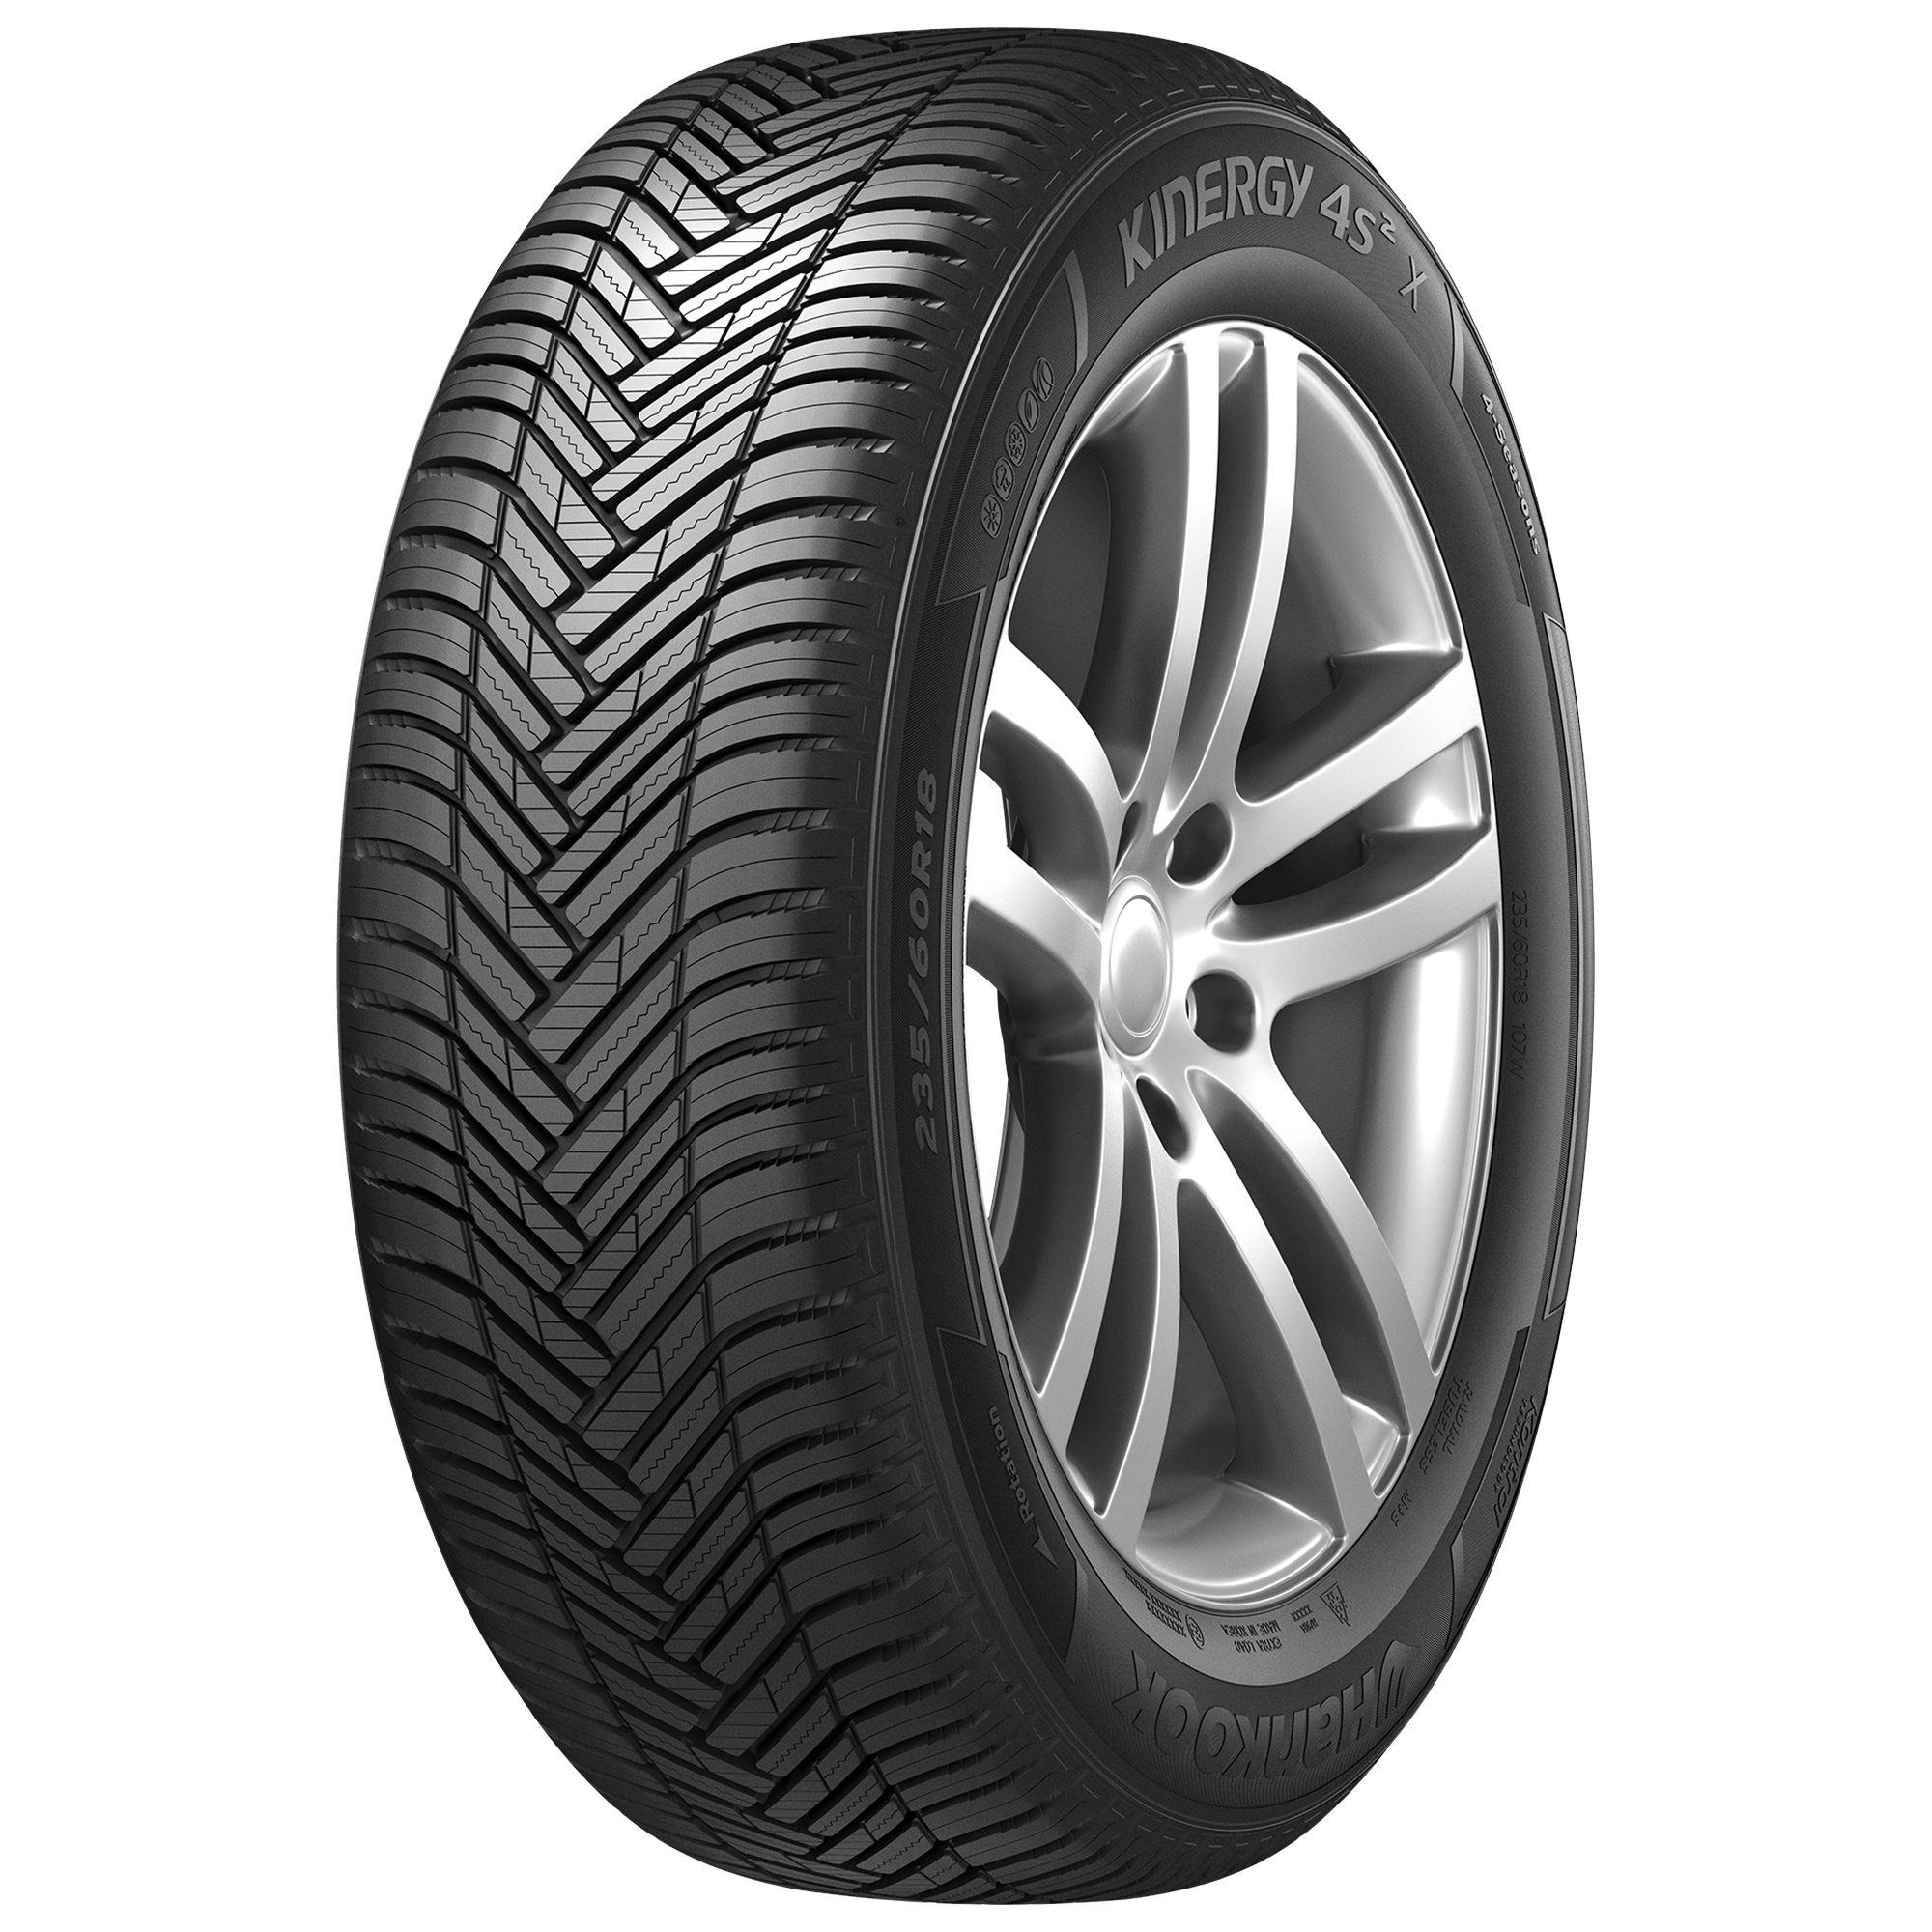 HANKOOK KINERGY 4S 2 X (H750A) 215/60R17 96V BSW